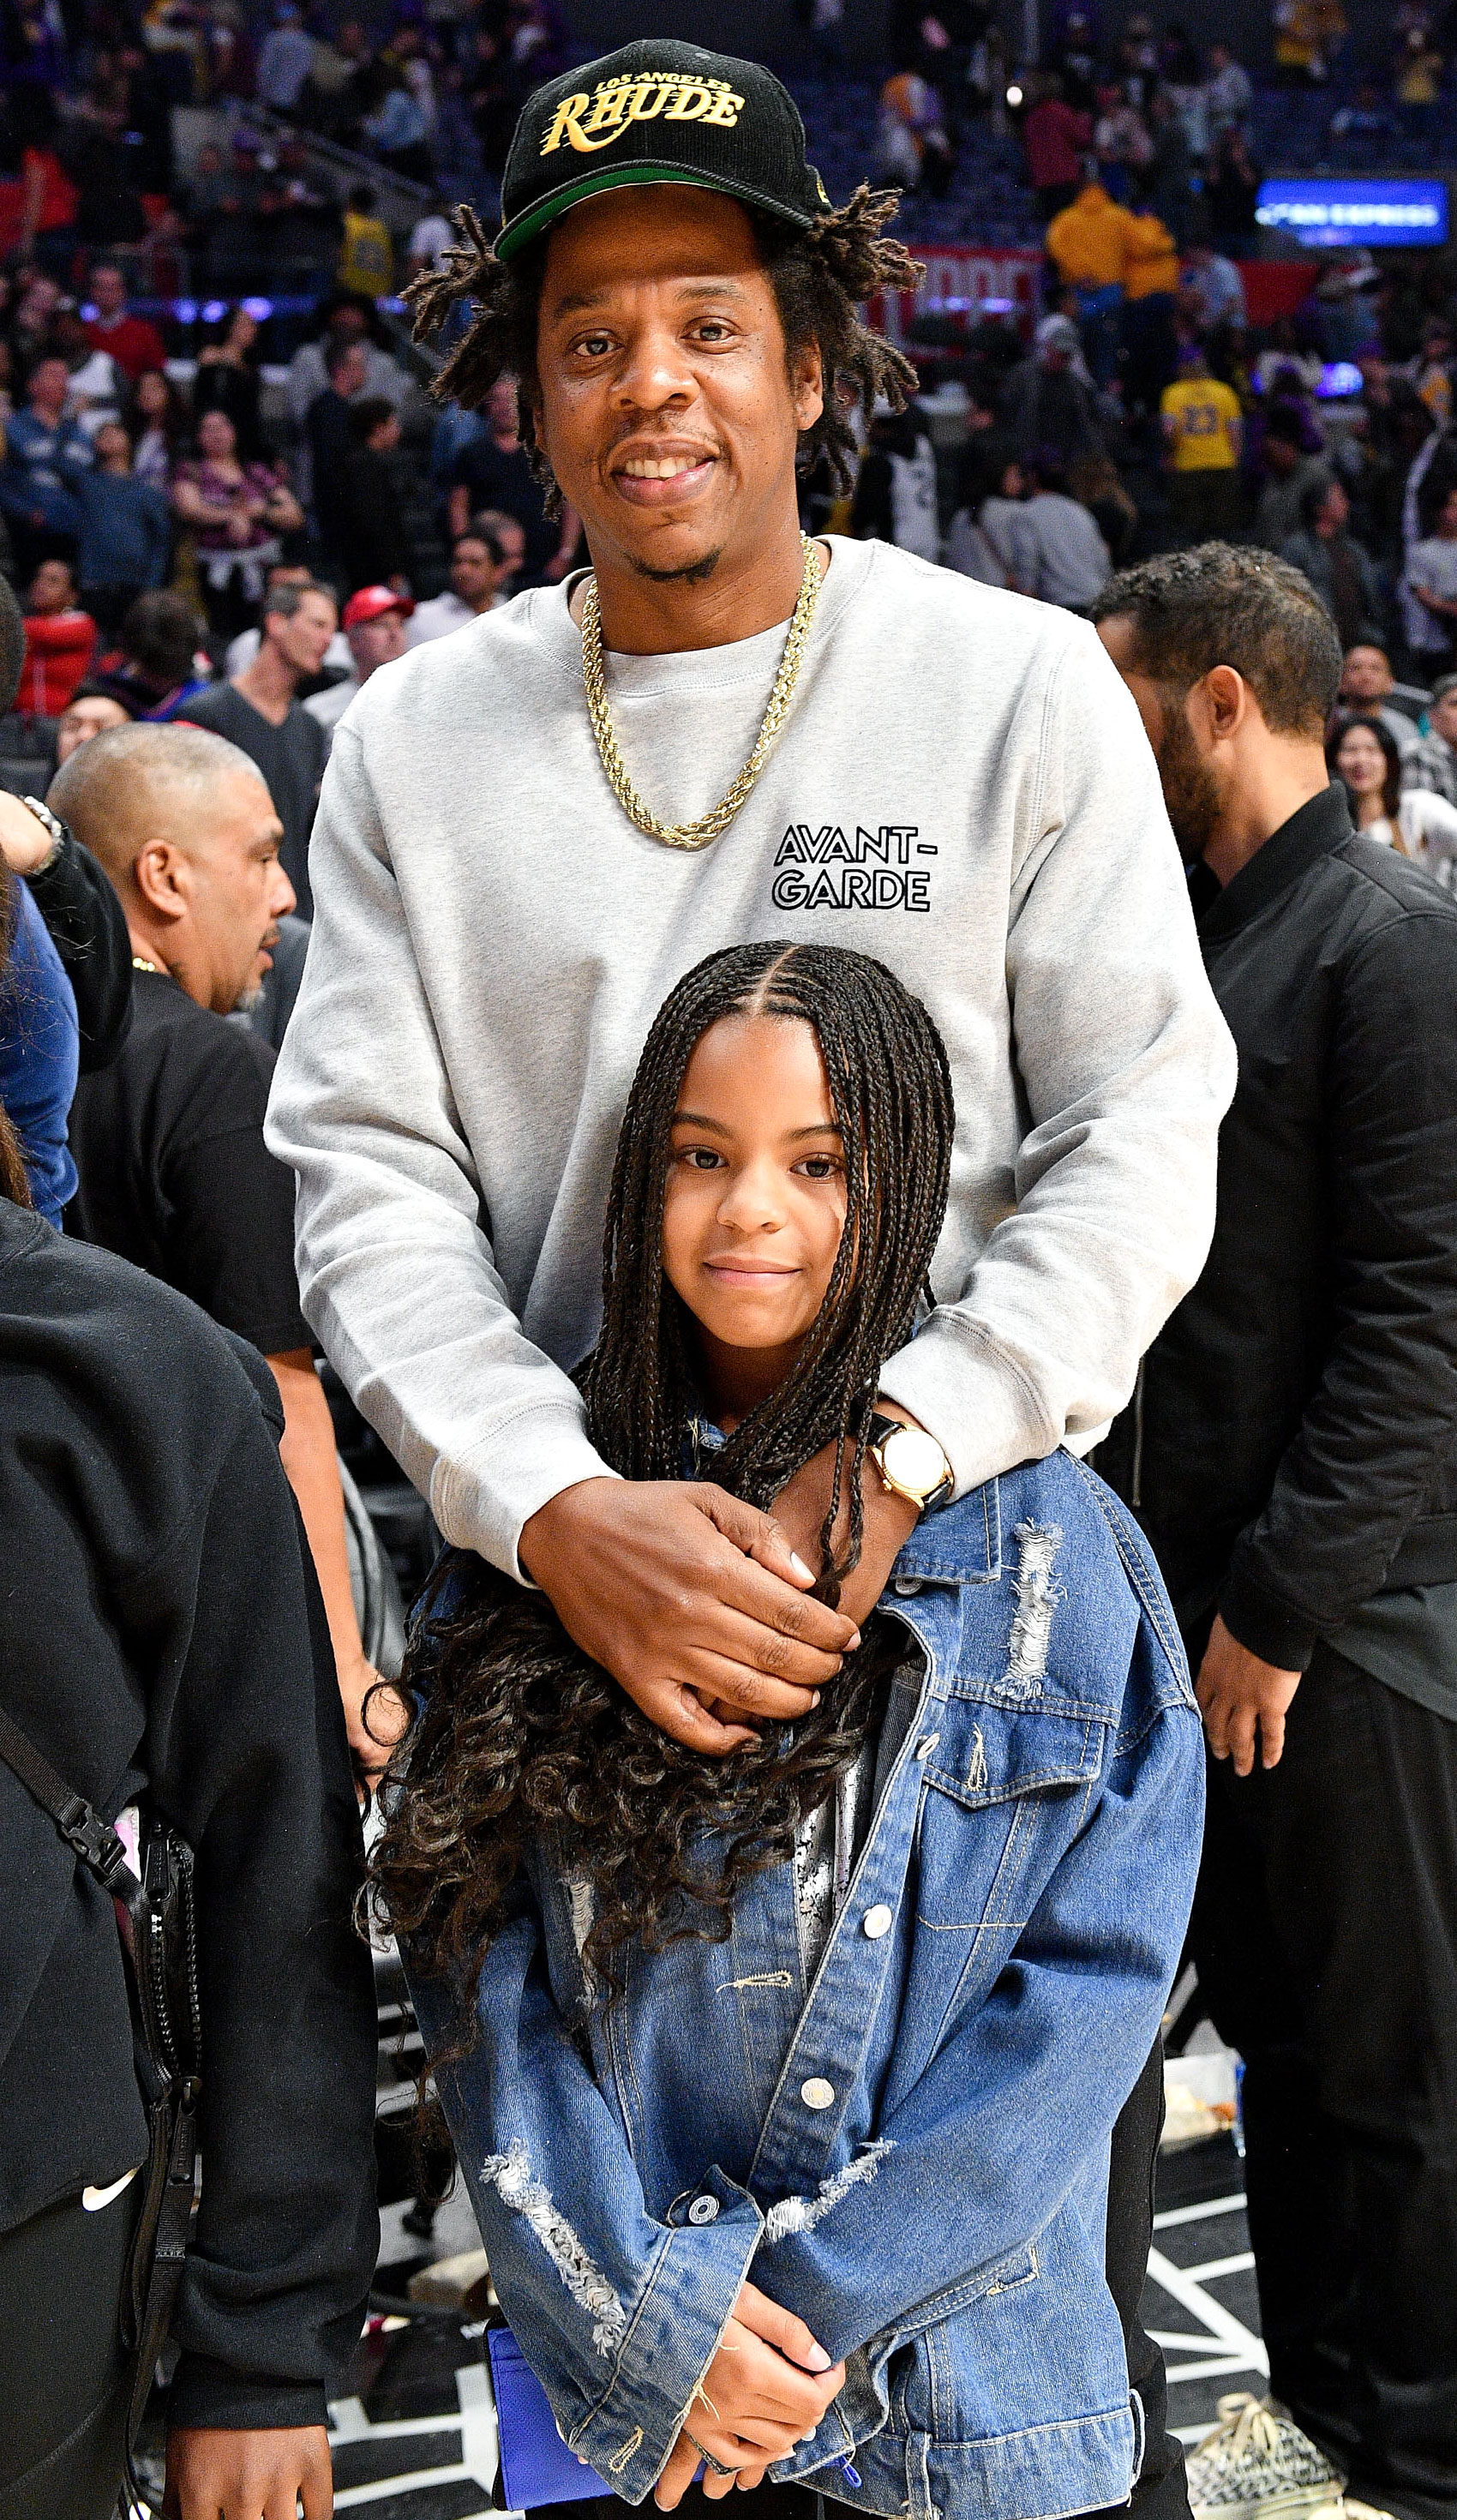 Blue Ivy carries $1,820 Louis Vuitton bag to NBA game